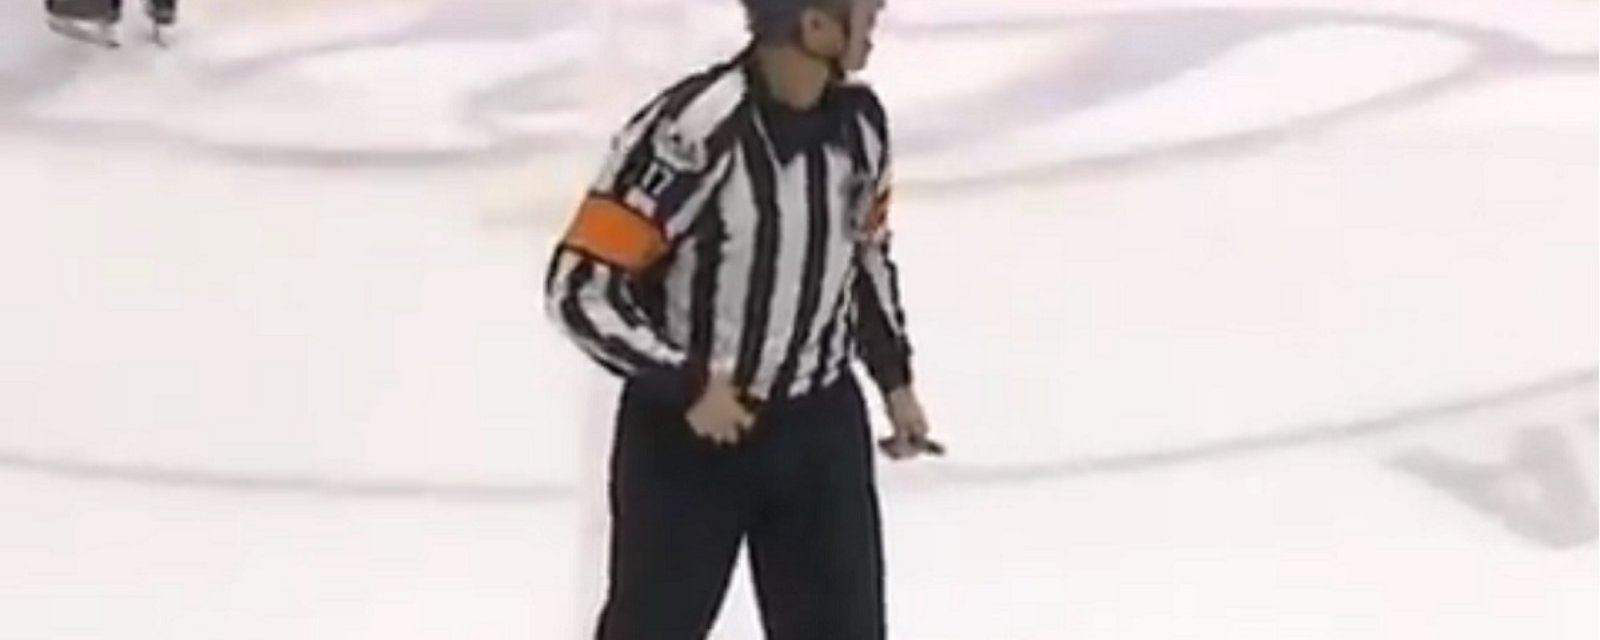 NHL official caught cursing at player on live mic.